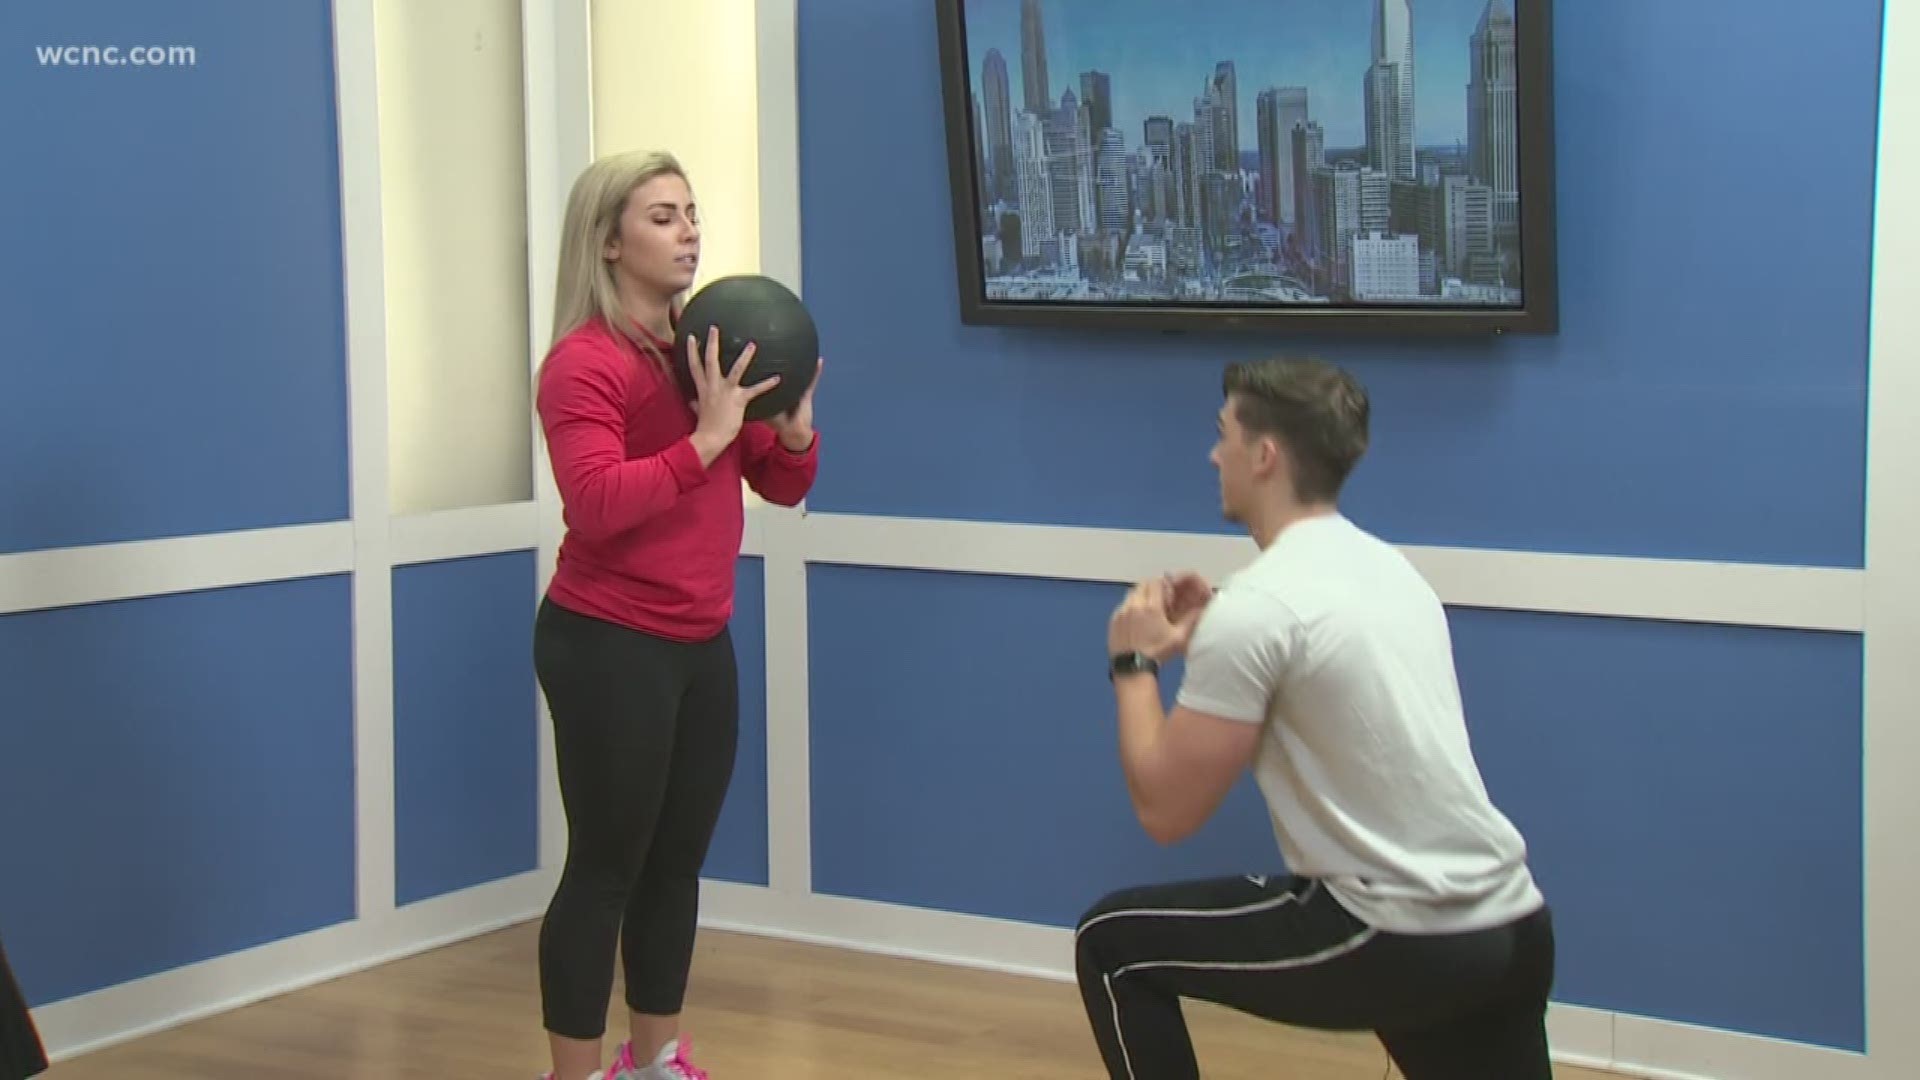 Try these exercises with your workout partner.